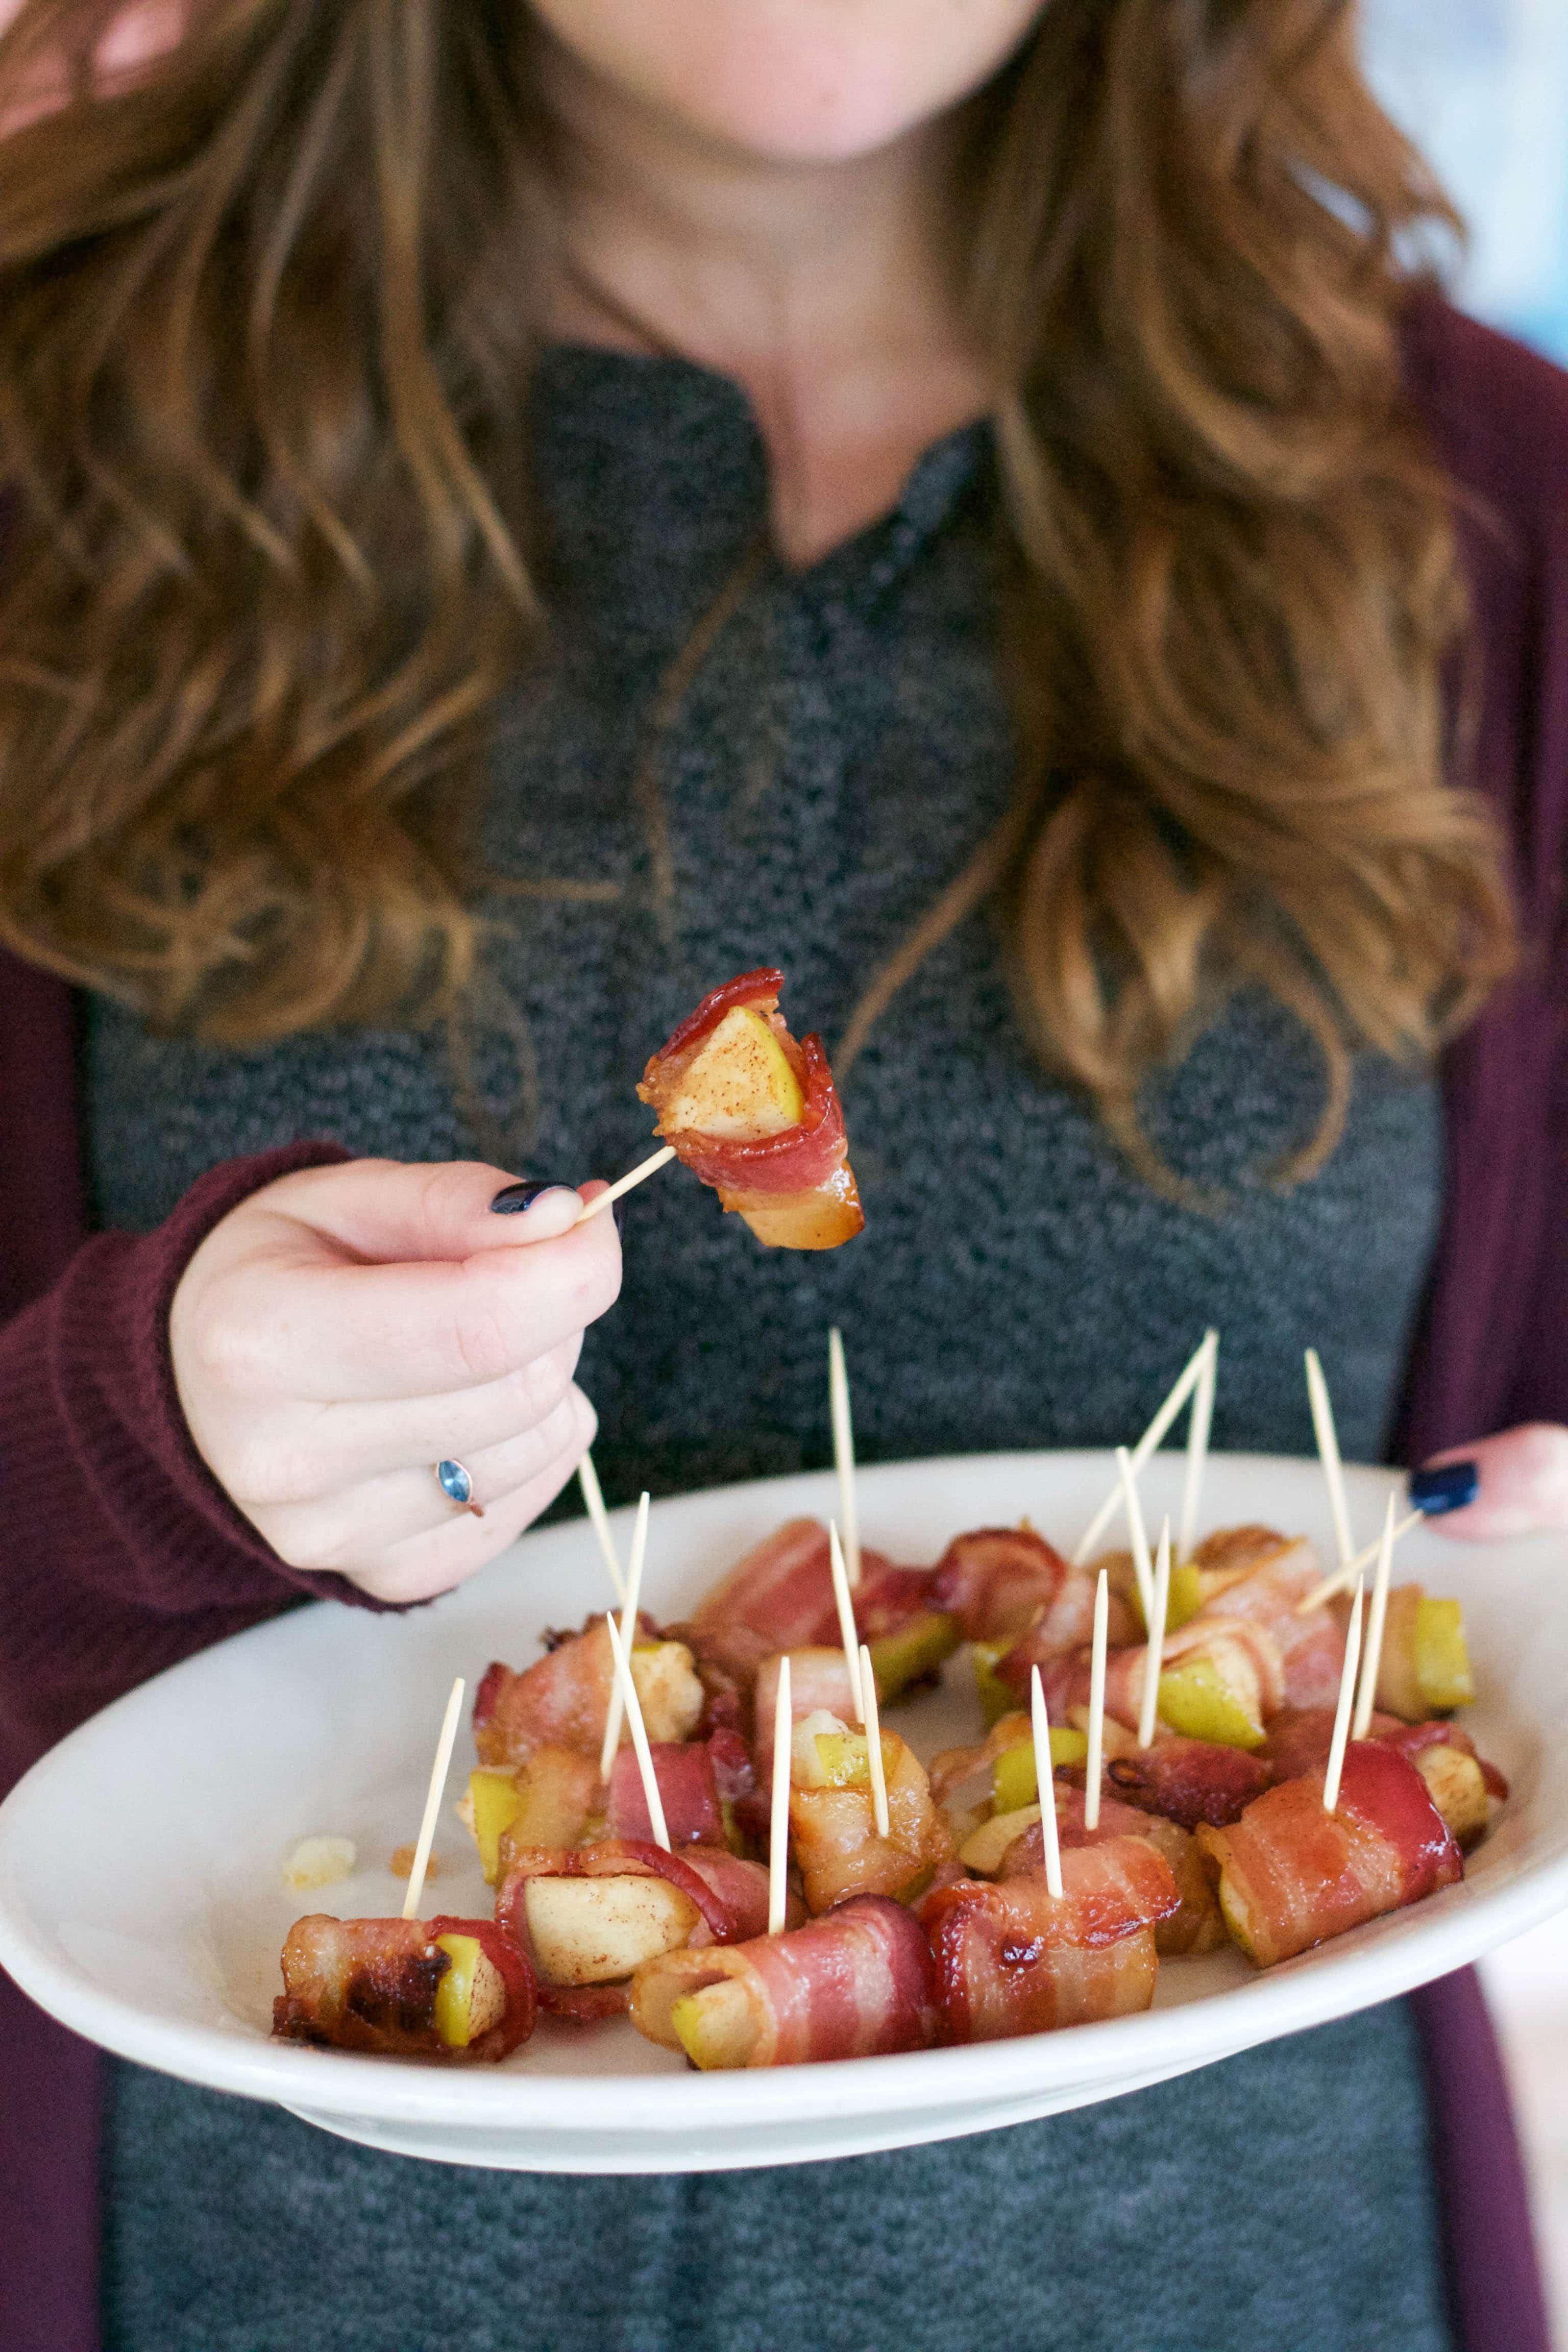 Brown Sugar Bacon Wrapped Apples